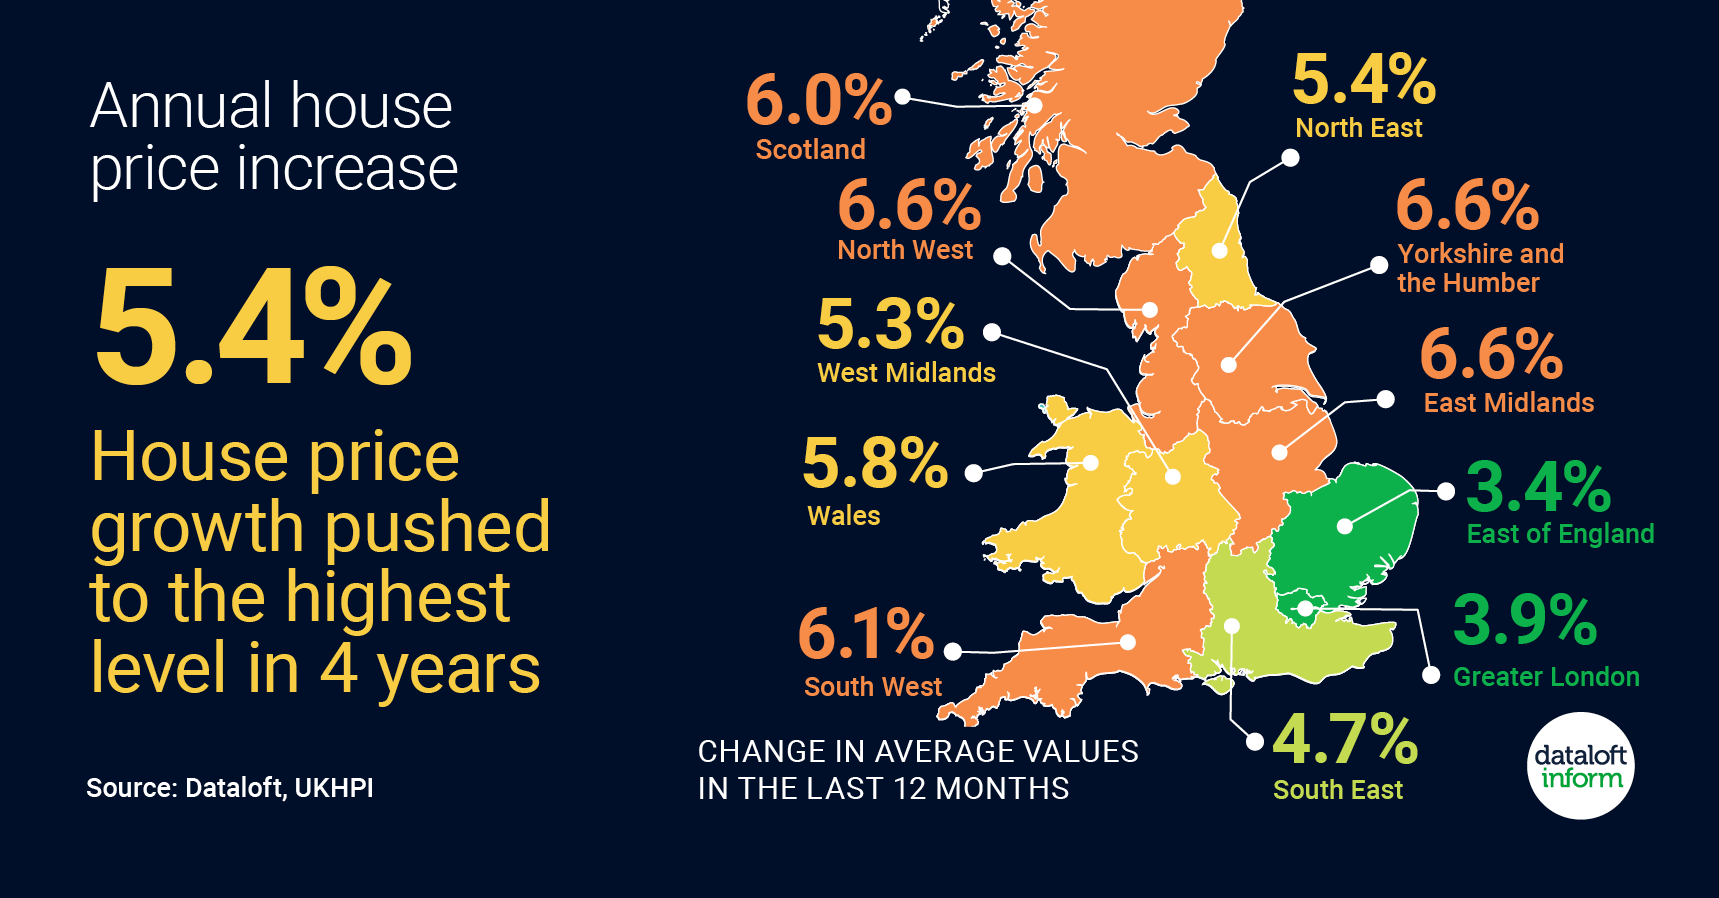 House price growth pushed to the highest level in 4 years